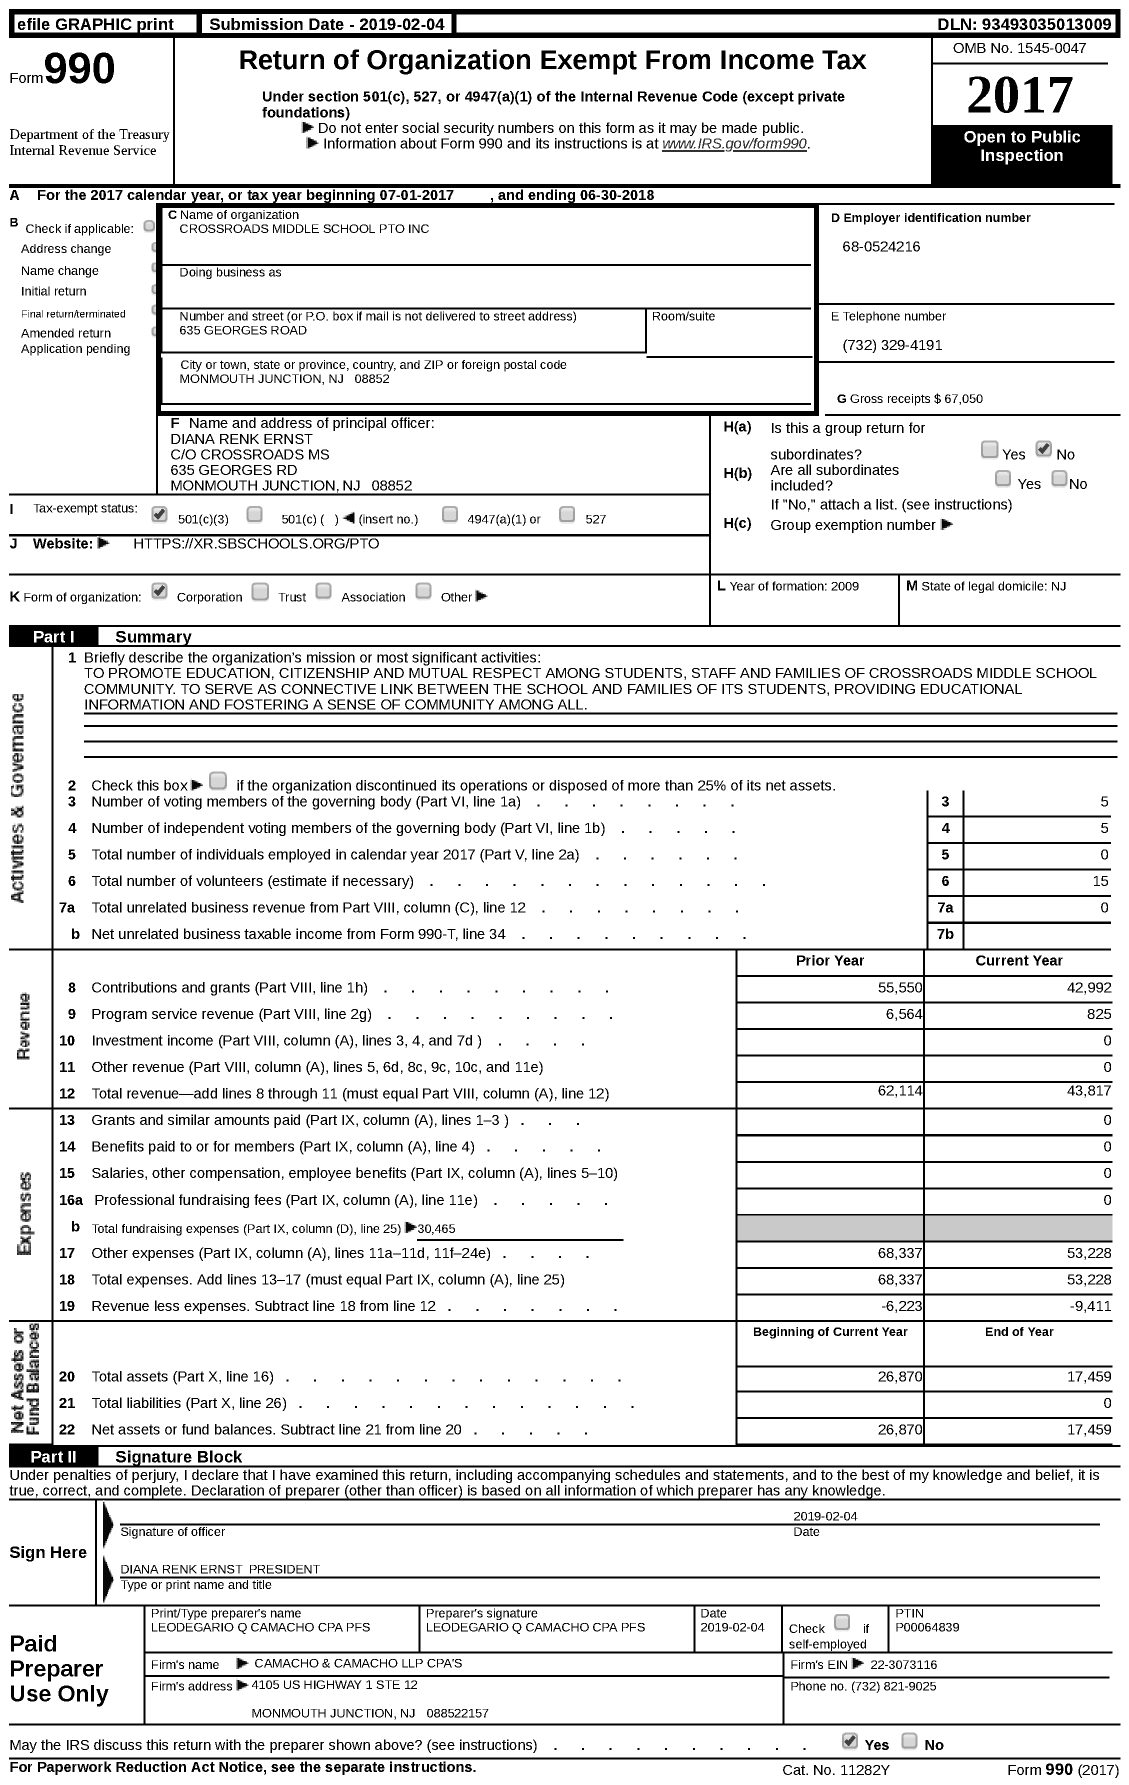 Image of first page of 2017 Form 990 for Crossroads Middle Schools